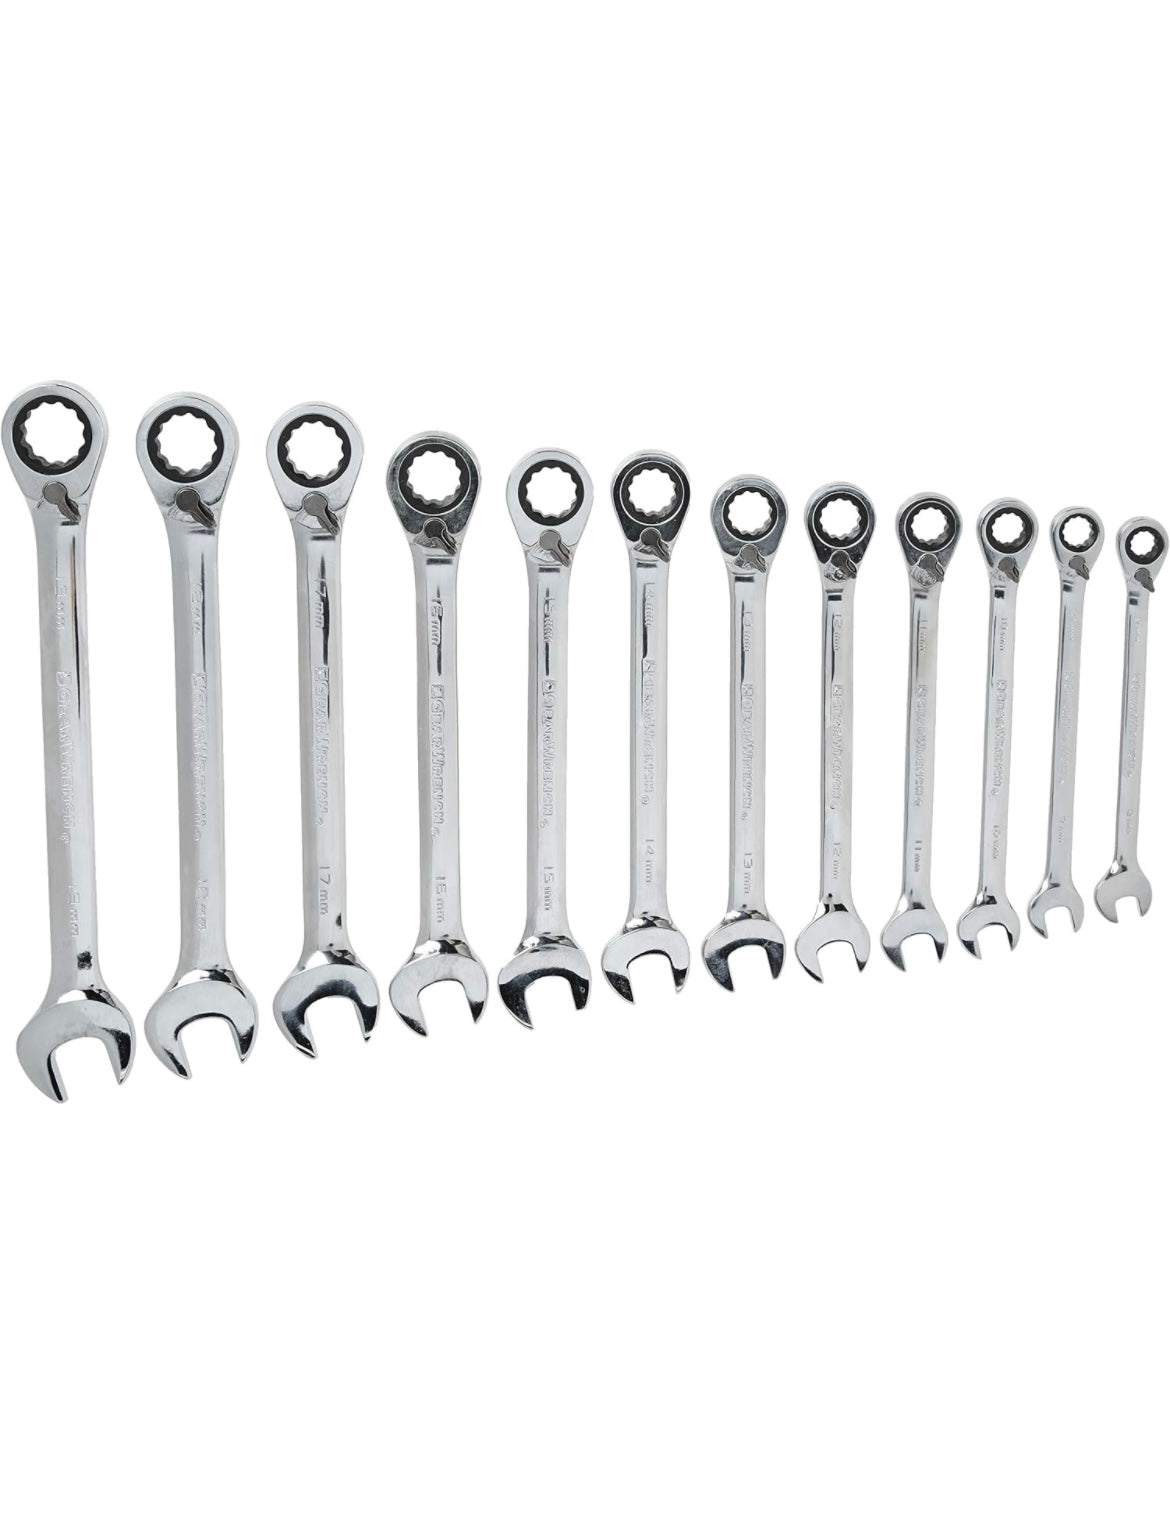 GEARWRENCH 12 Pc. 12 Pt. Reversible Ratcheting Combination Wrench Set, Metric - 9620N **Missing 10mm**